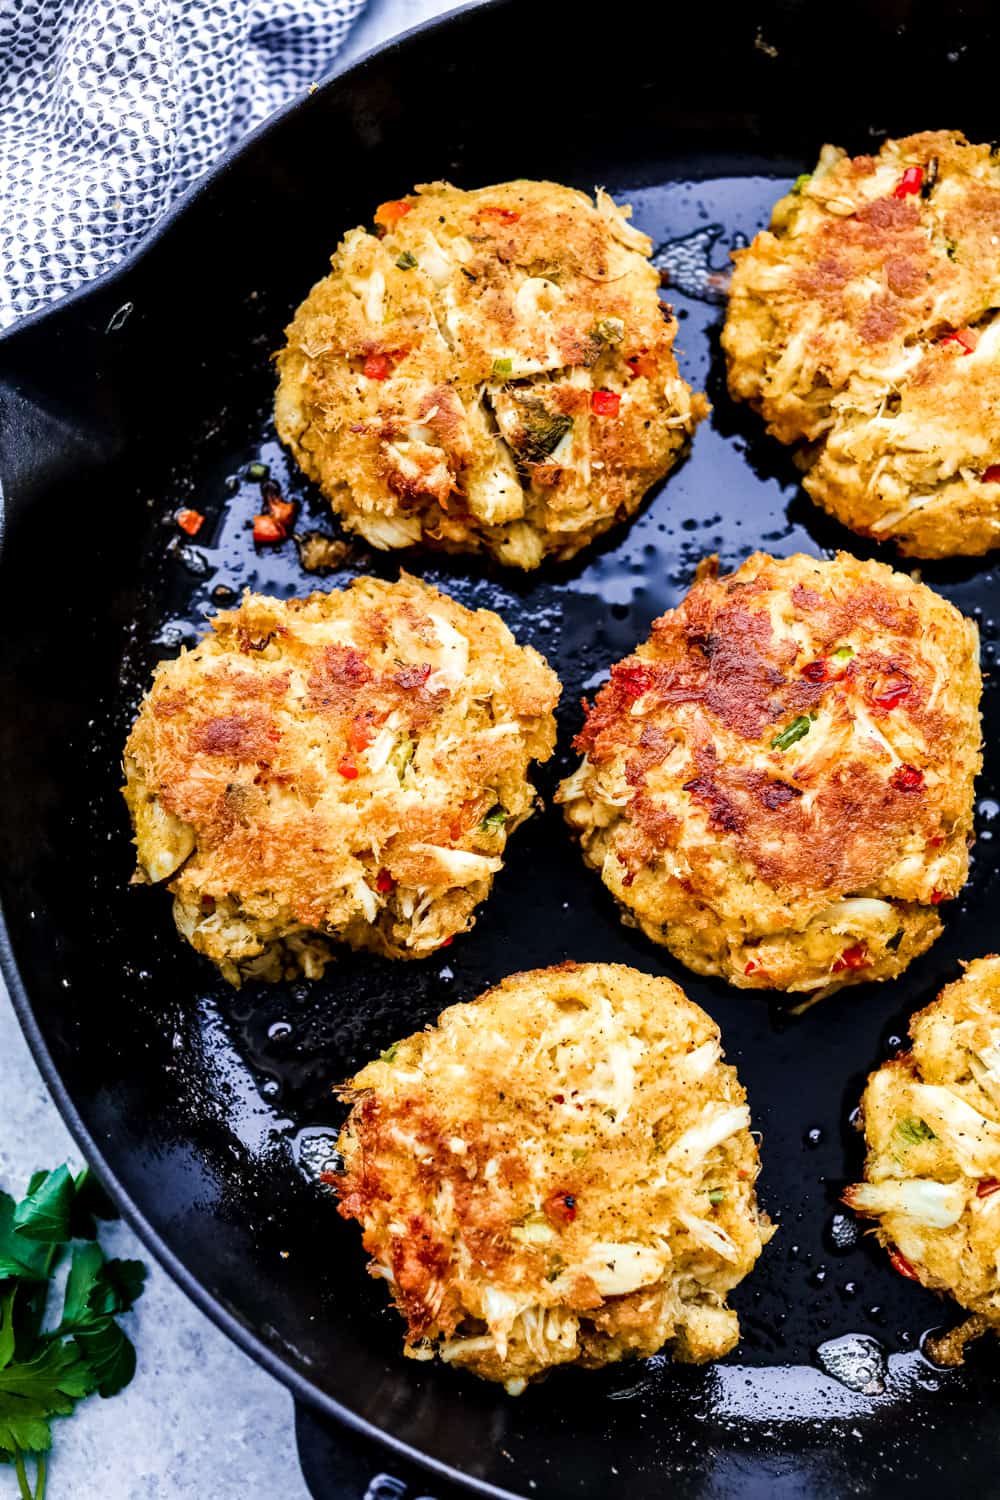 Crab cakes on a skillet cooking.